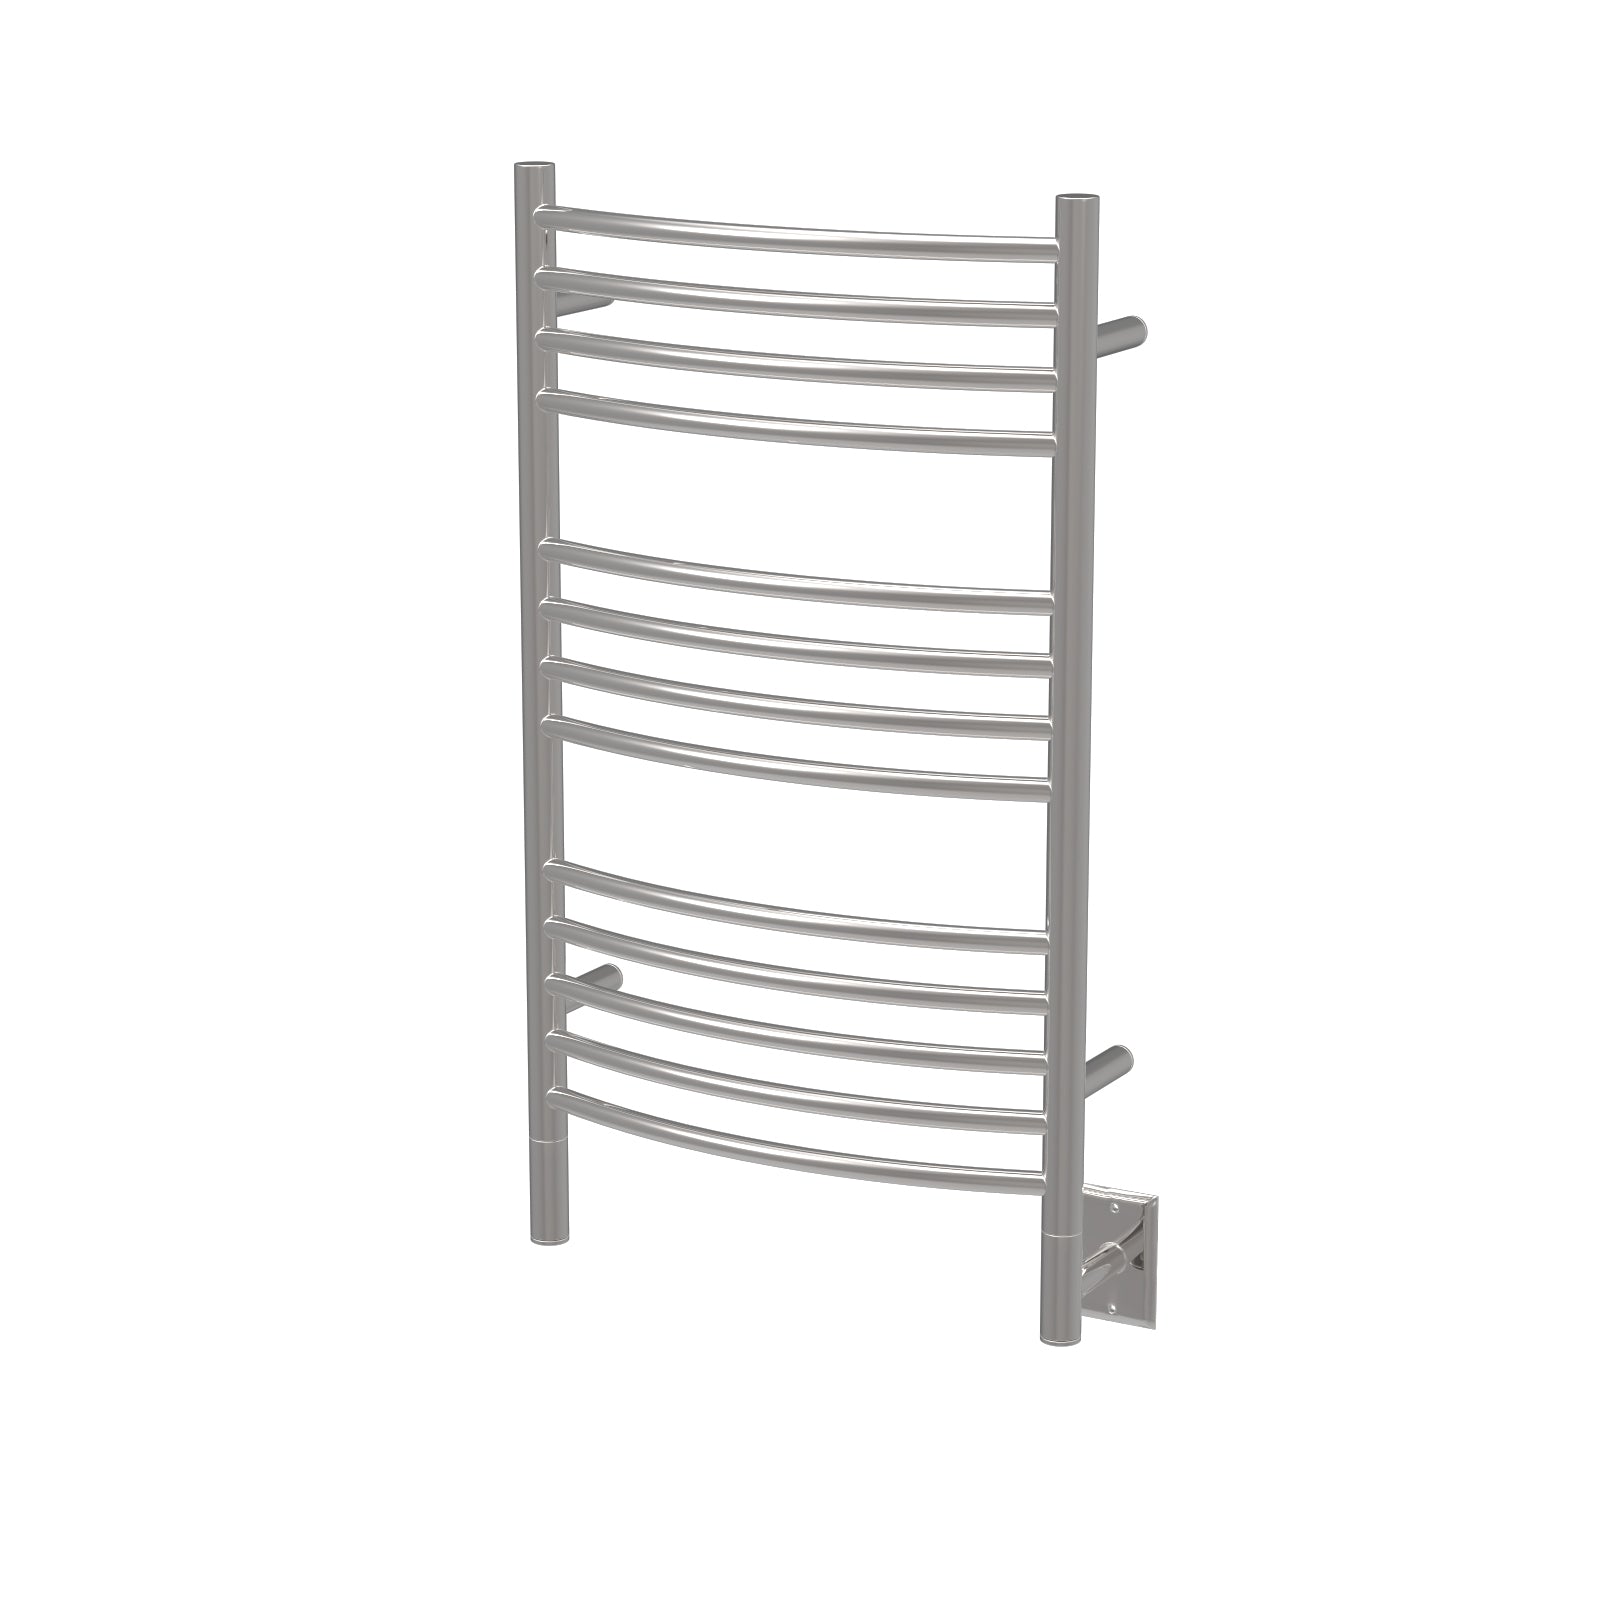 Amba Jeeves Model C Curved 13 Bar Hardwired Towel Warmer